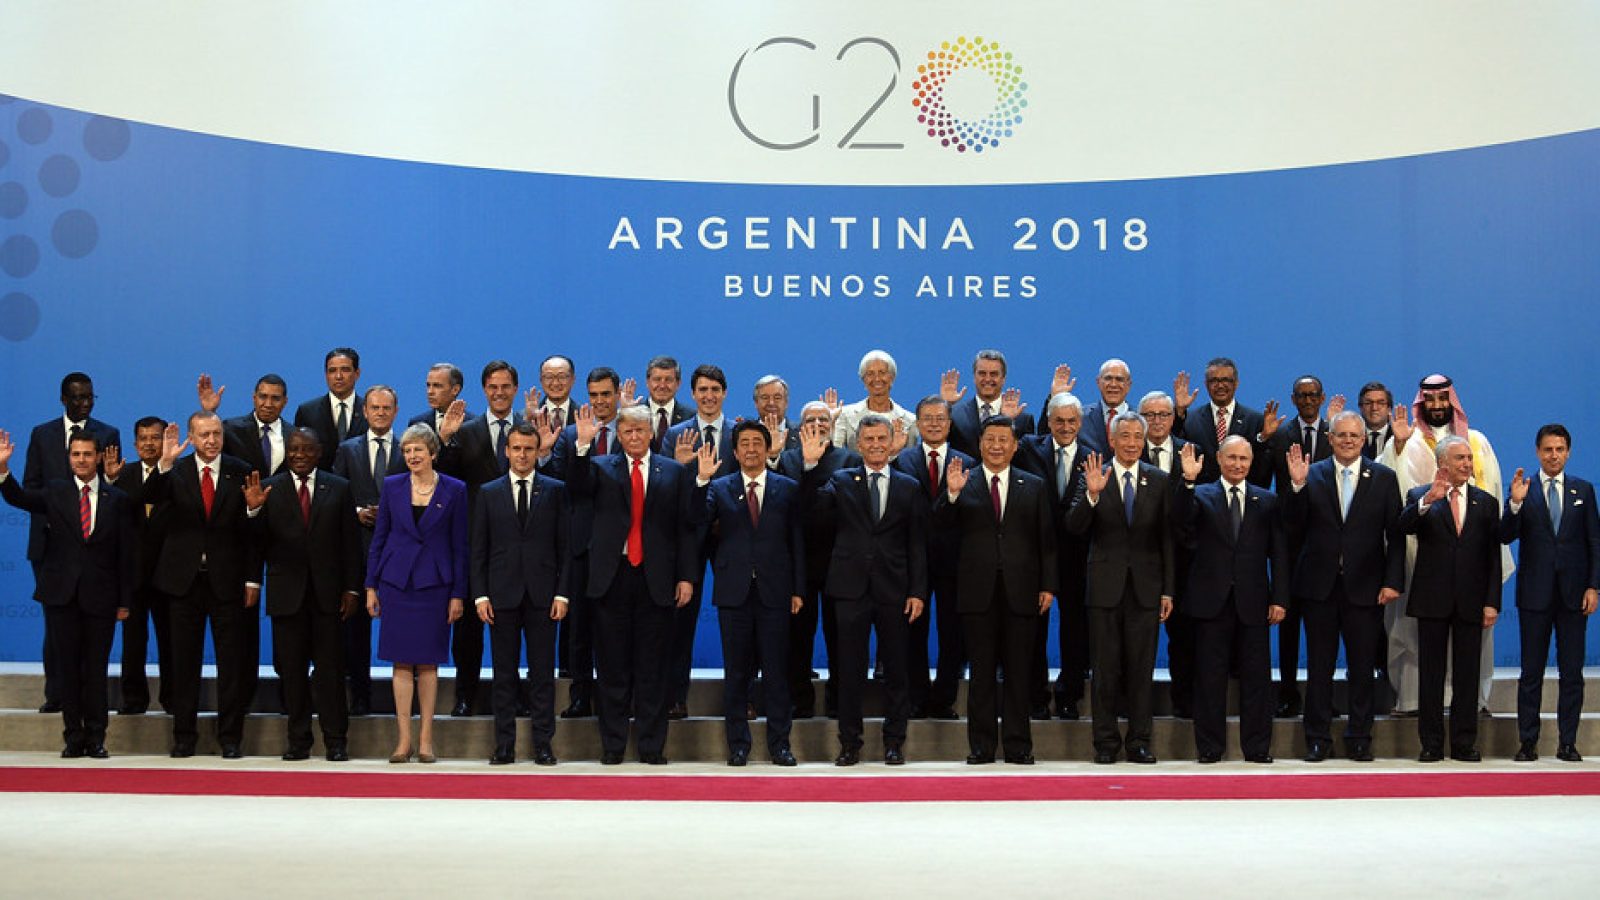 world leaders stand together at the G20 conference